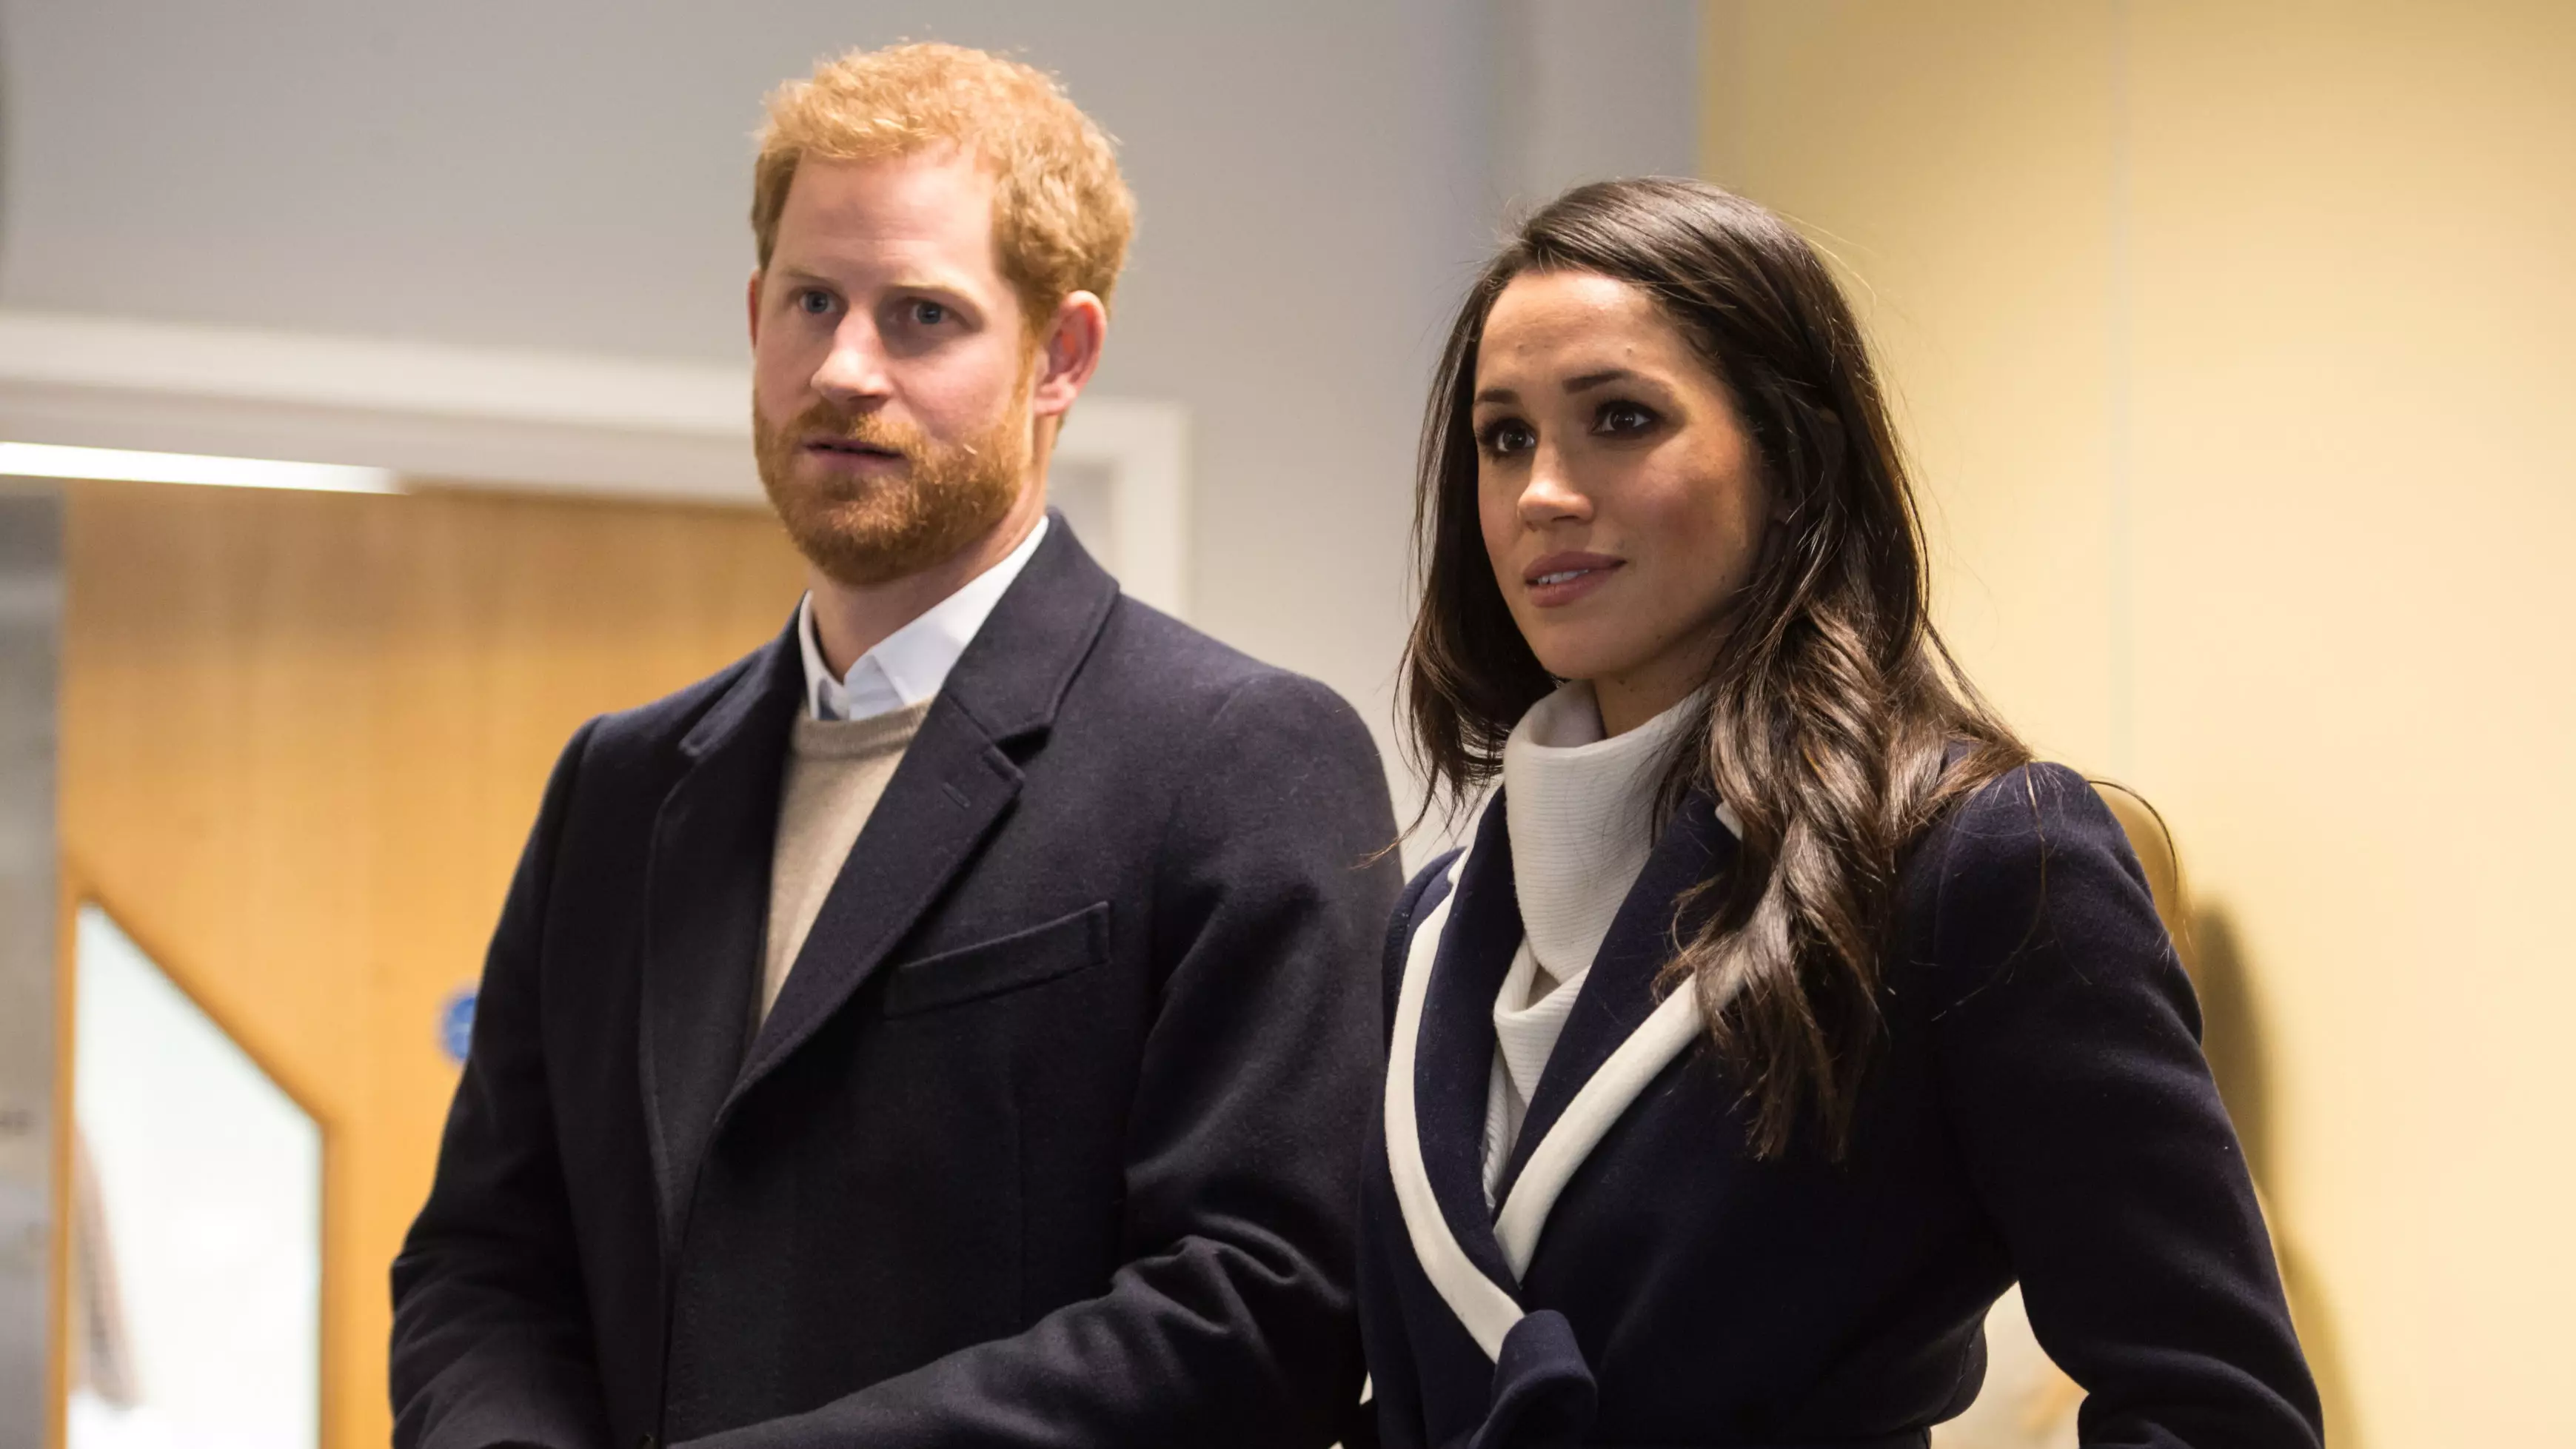 Prince Harry And Meghan Markle Won't Return To The Royal Family